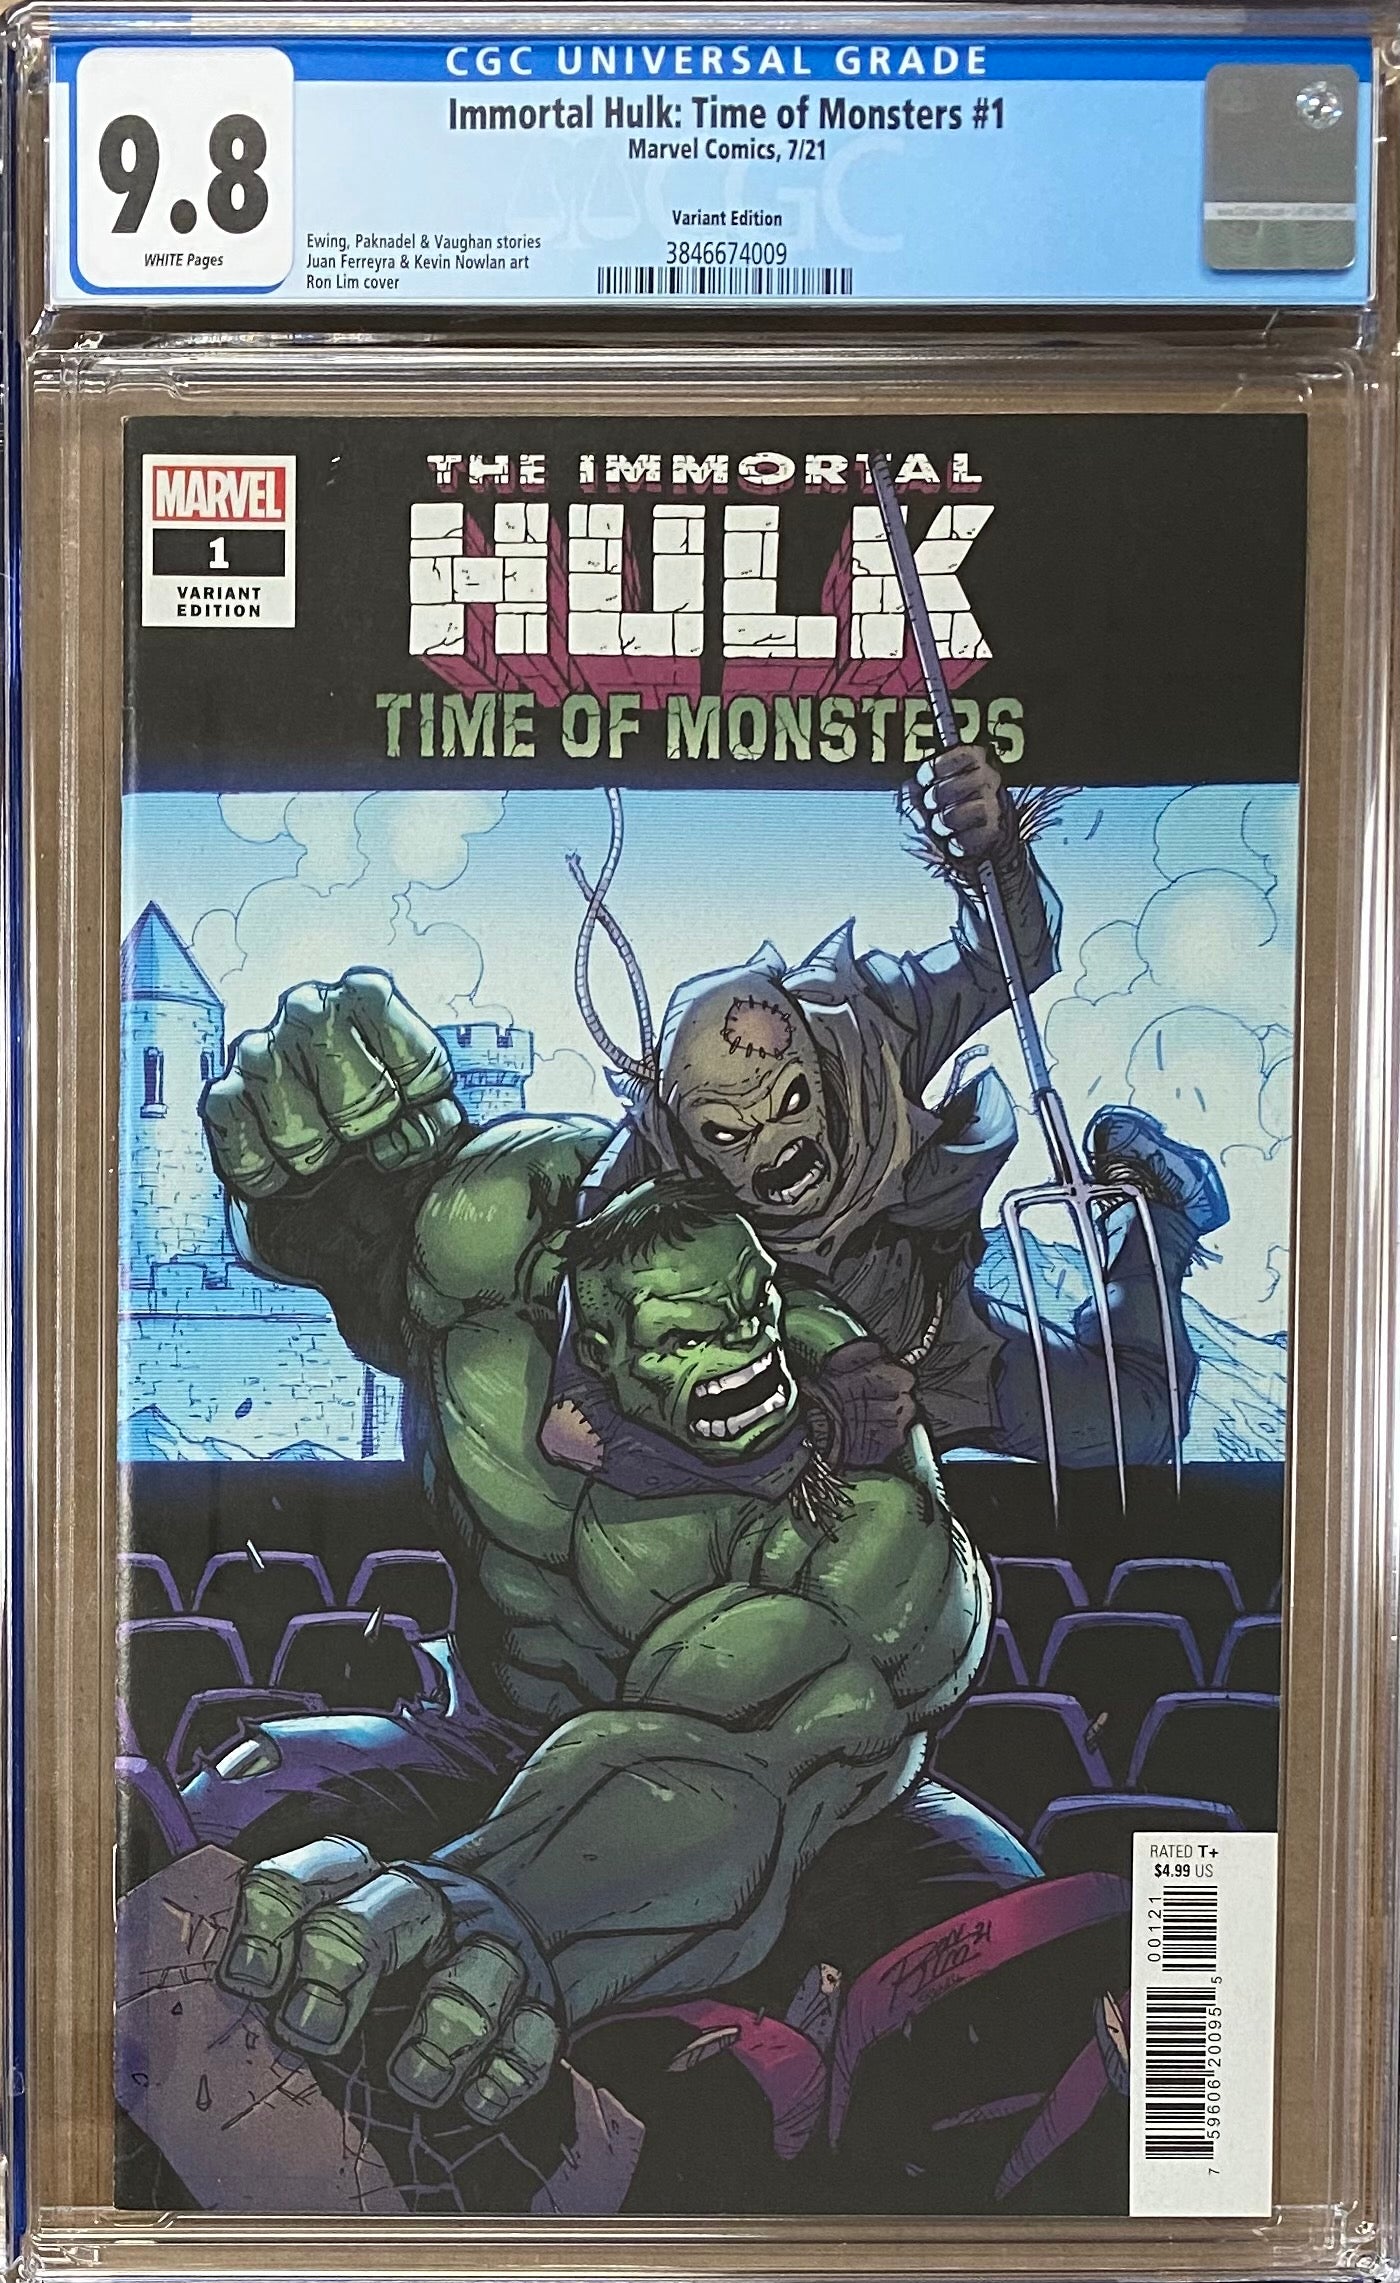 Immortal Hulk: Time of Monsters #1 Variant CGC 9.8